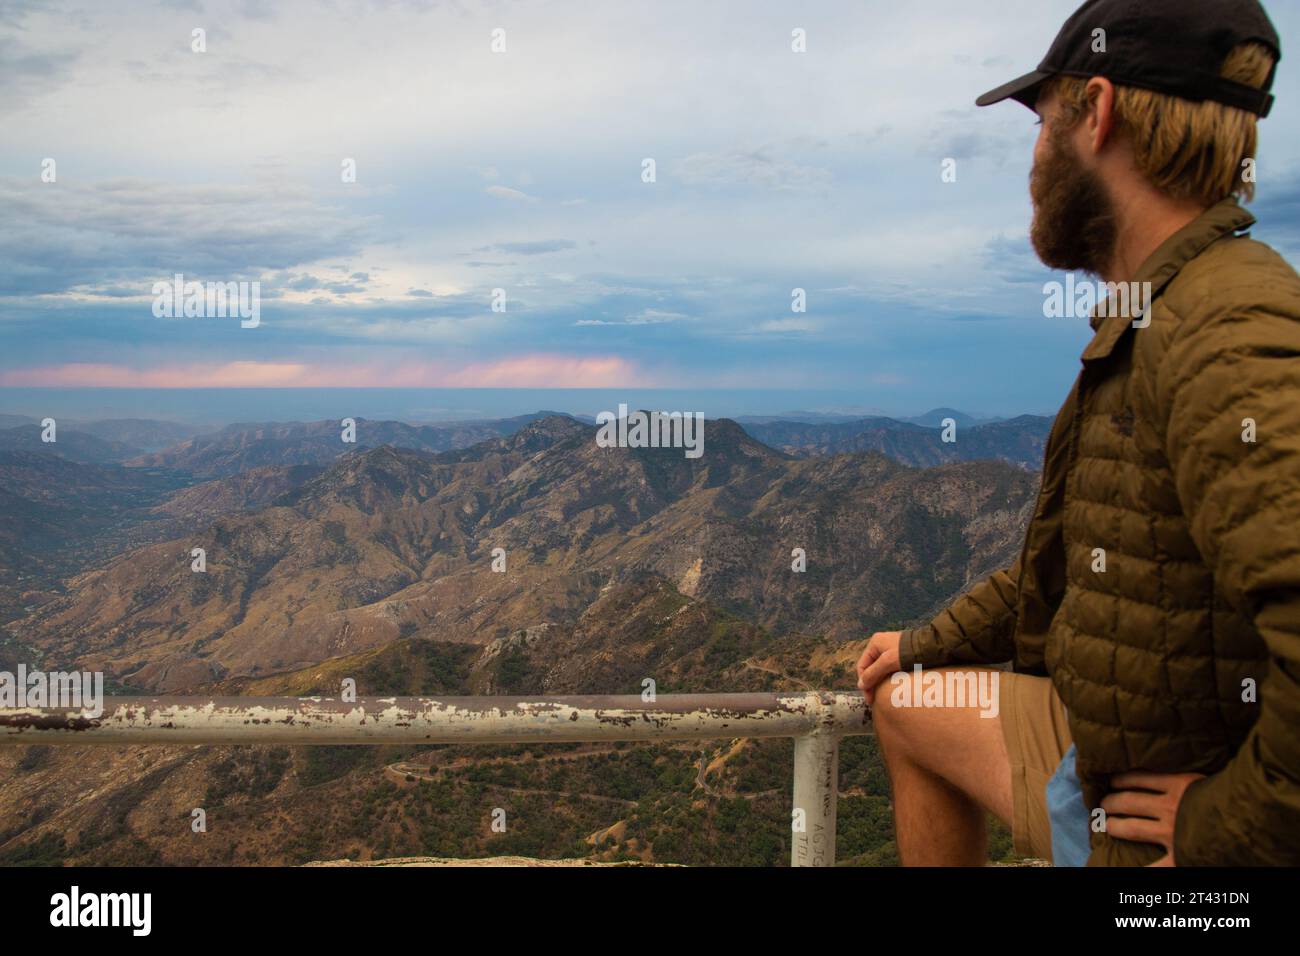 Man standing by railings looking at distant village in mountain valley, Sequoia National Park, California, USA Stock Photo